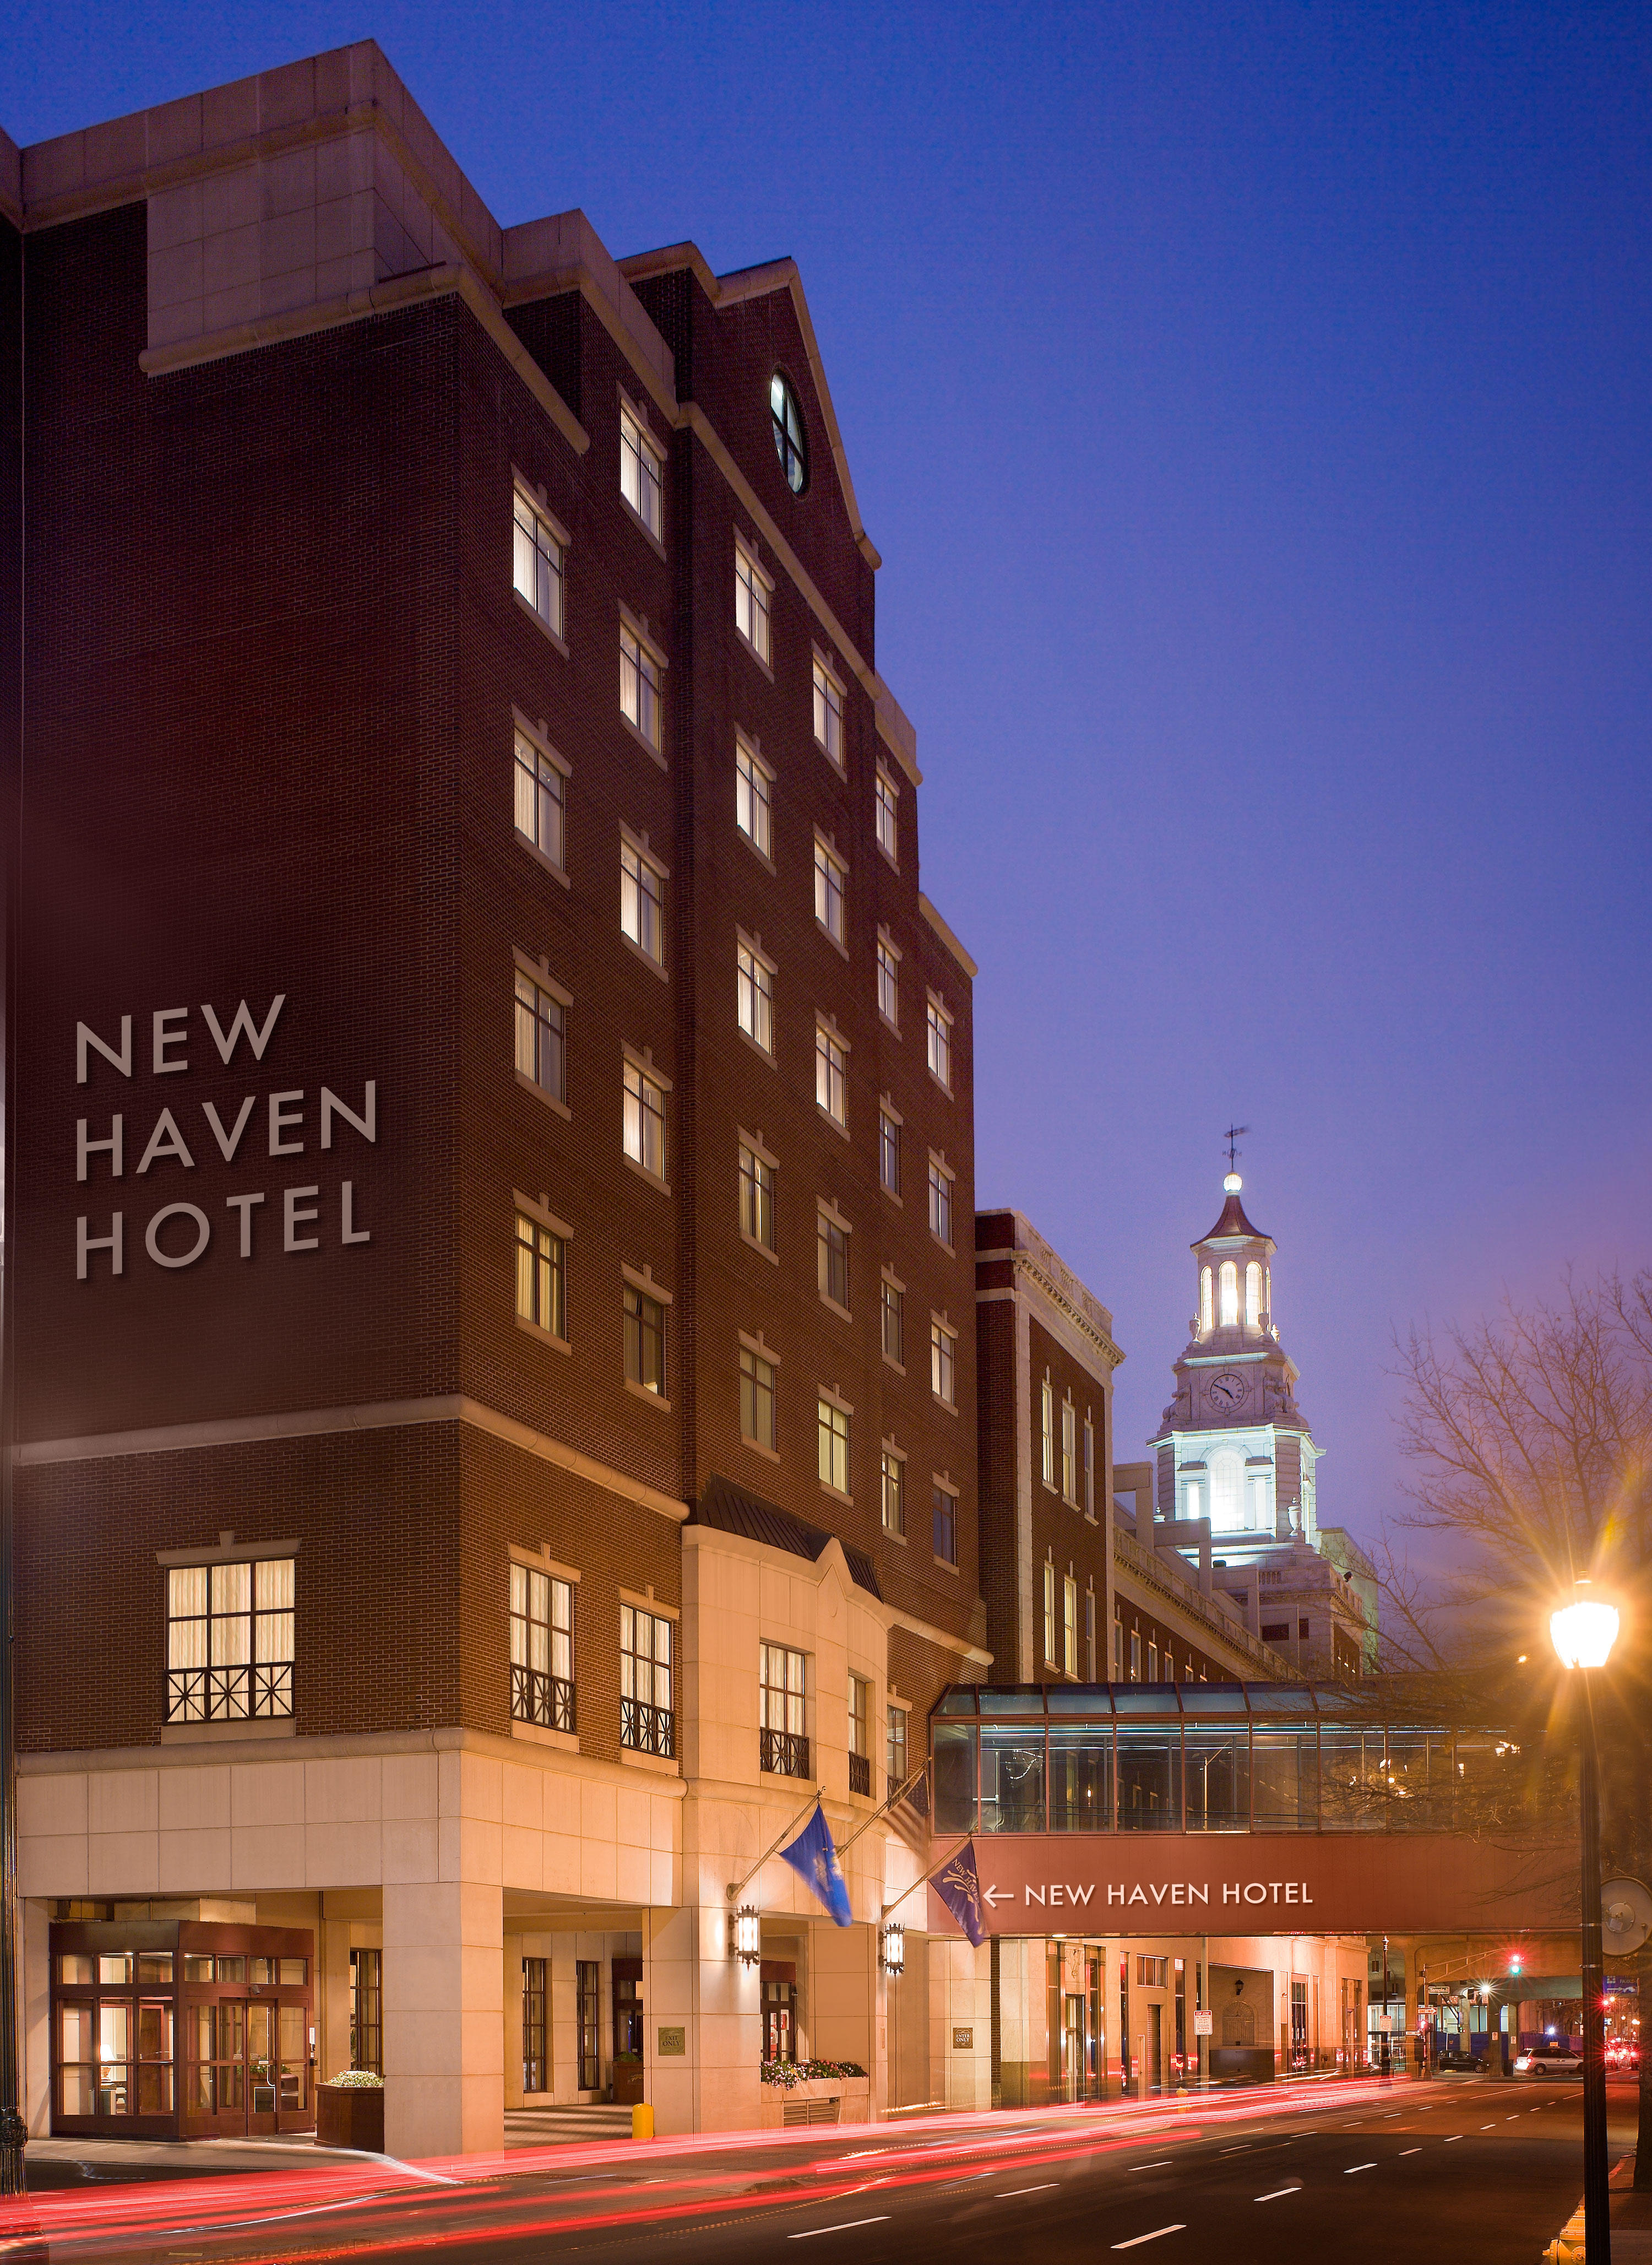 The New Haven Hotel at Yale University right in downtown New Haven, CT.